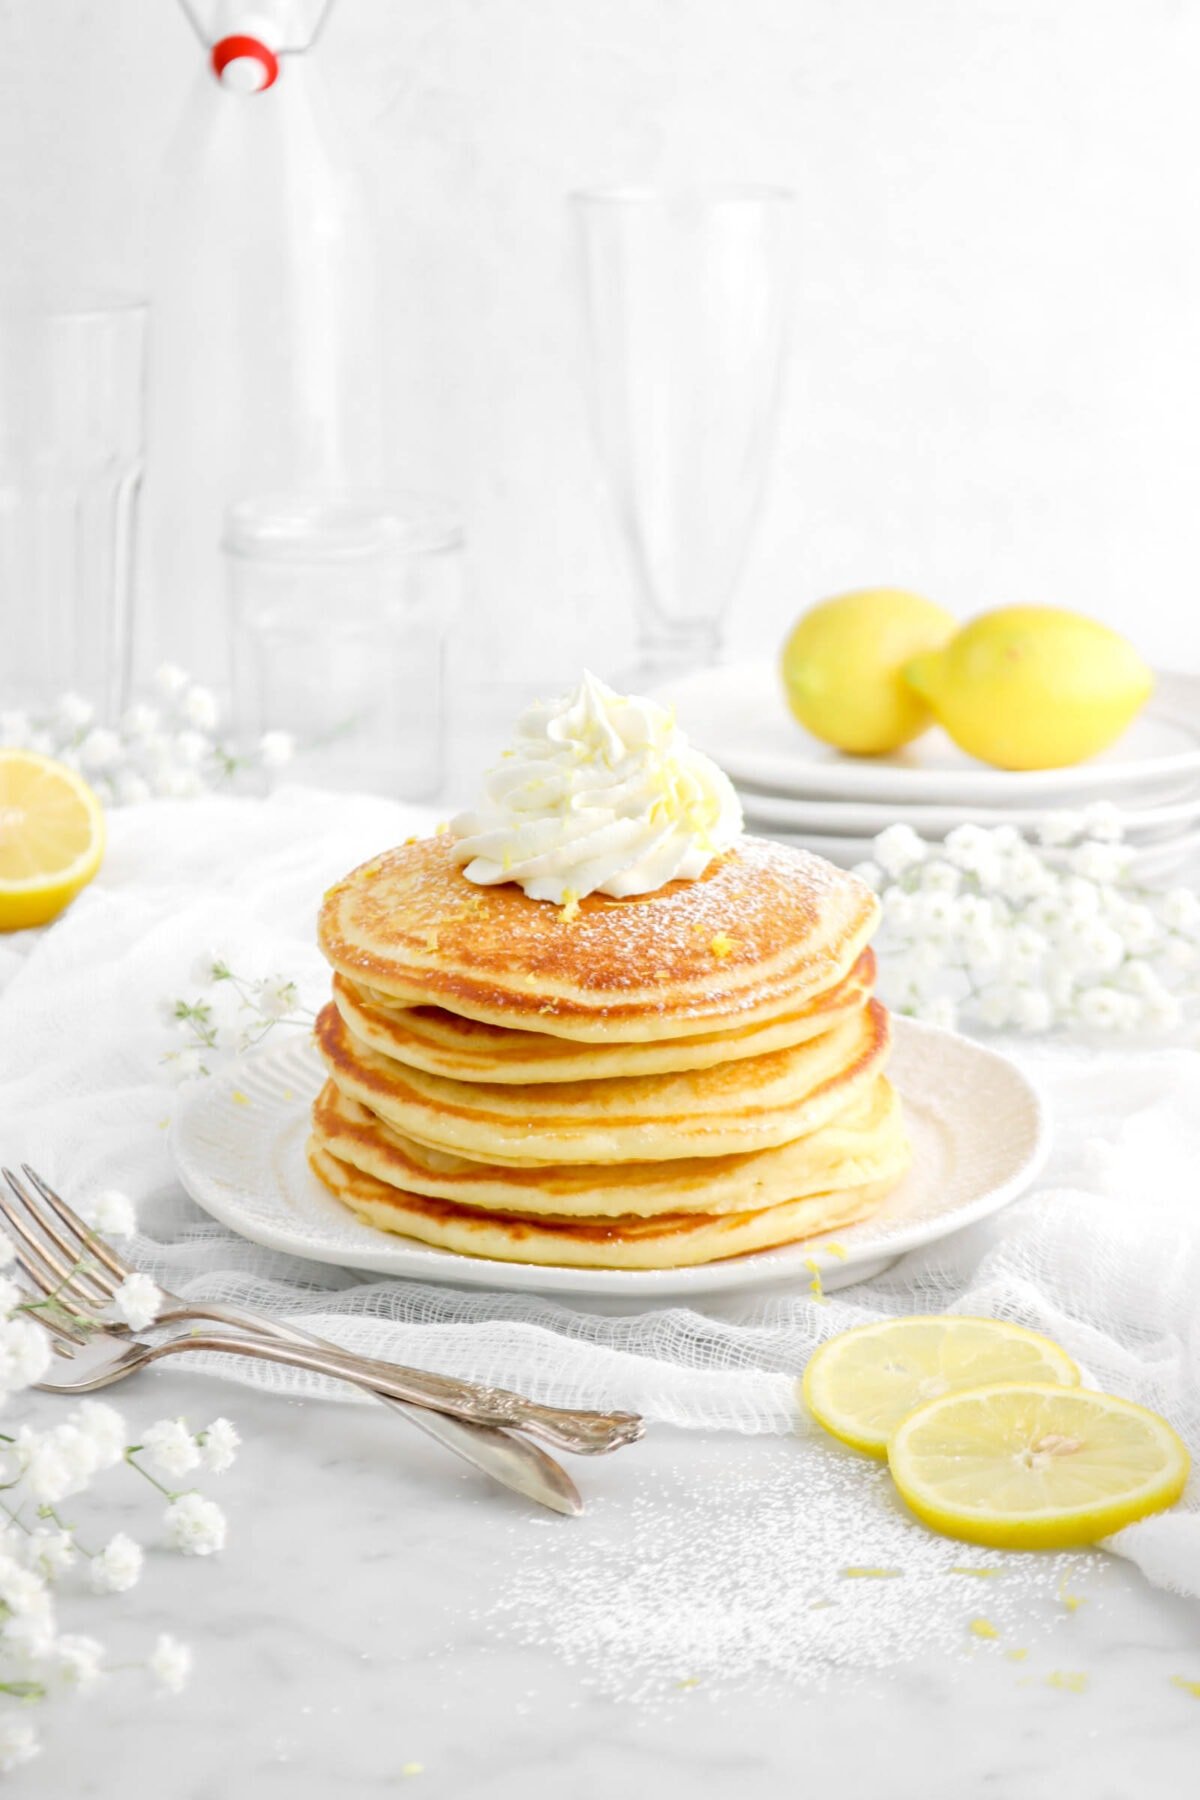 stack of pancakes on white plate with piped whipped cream on top, lemon zest, and powdered sugar with lemon slices around, two forks, and flowers